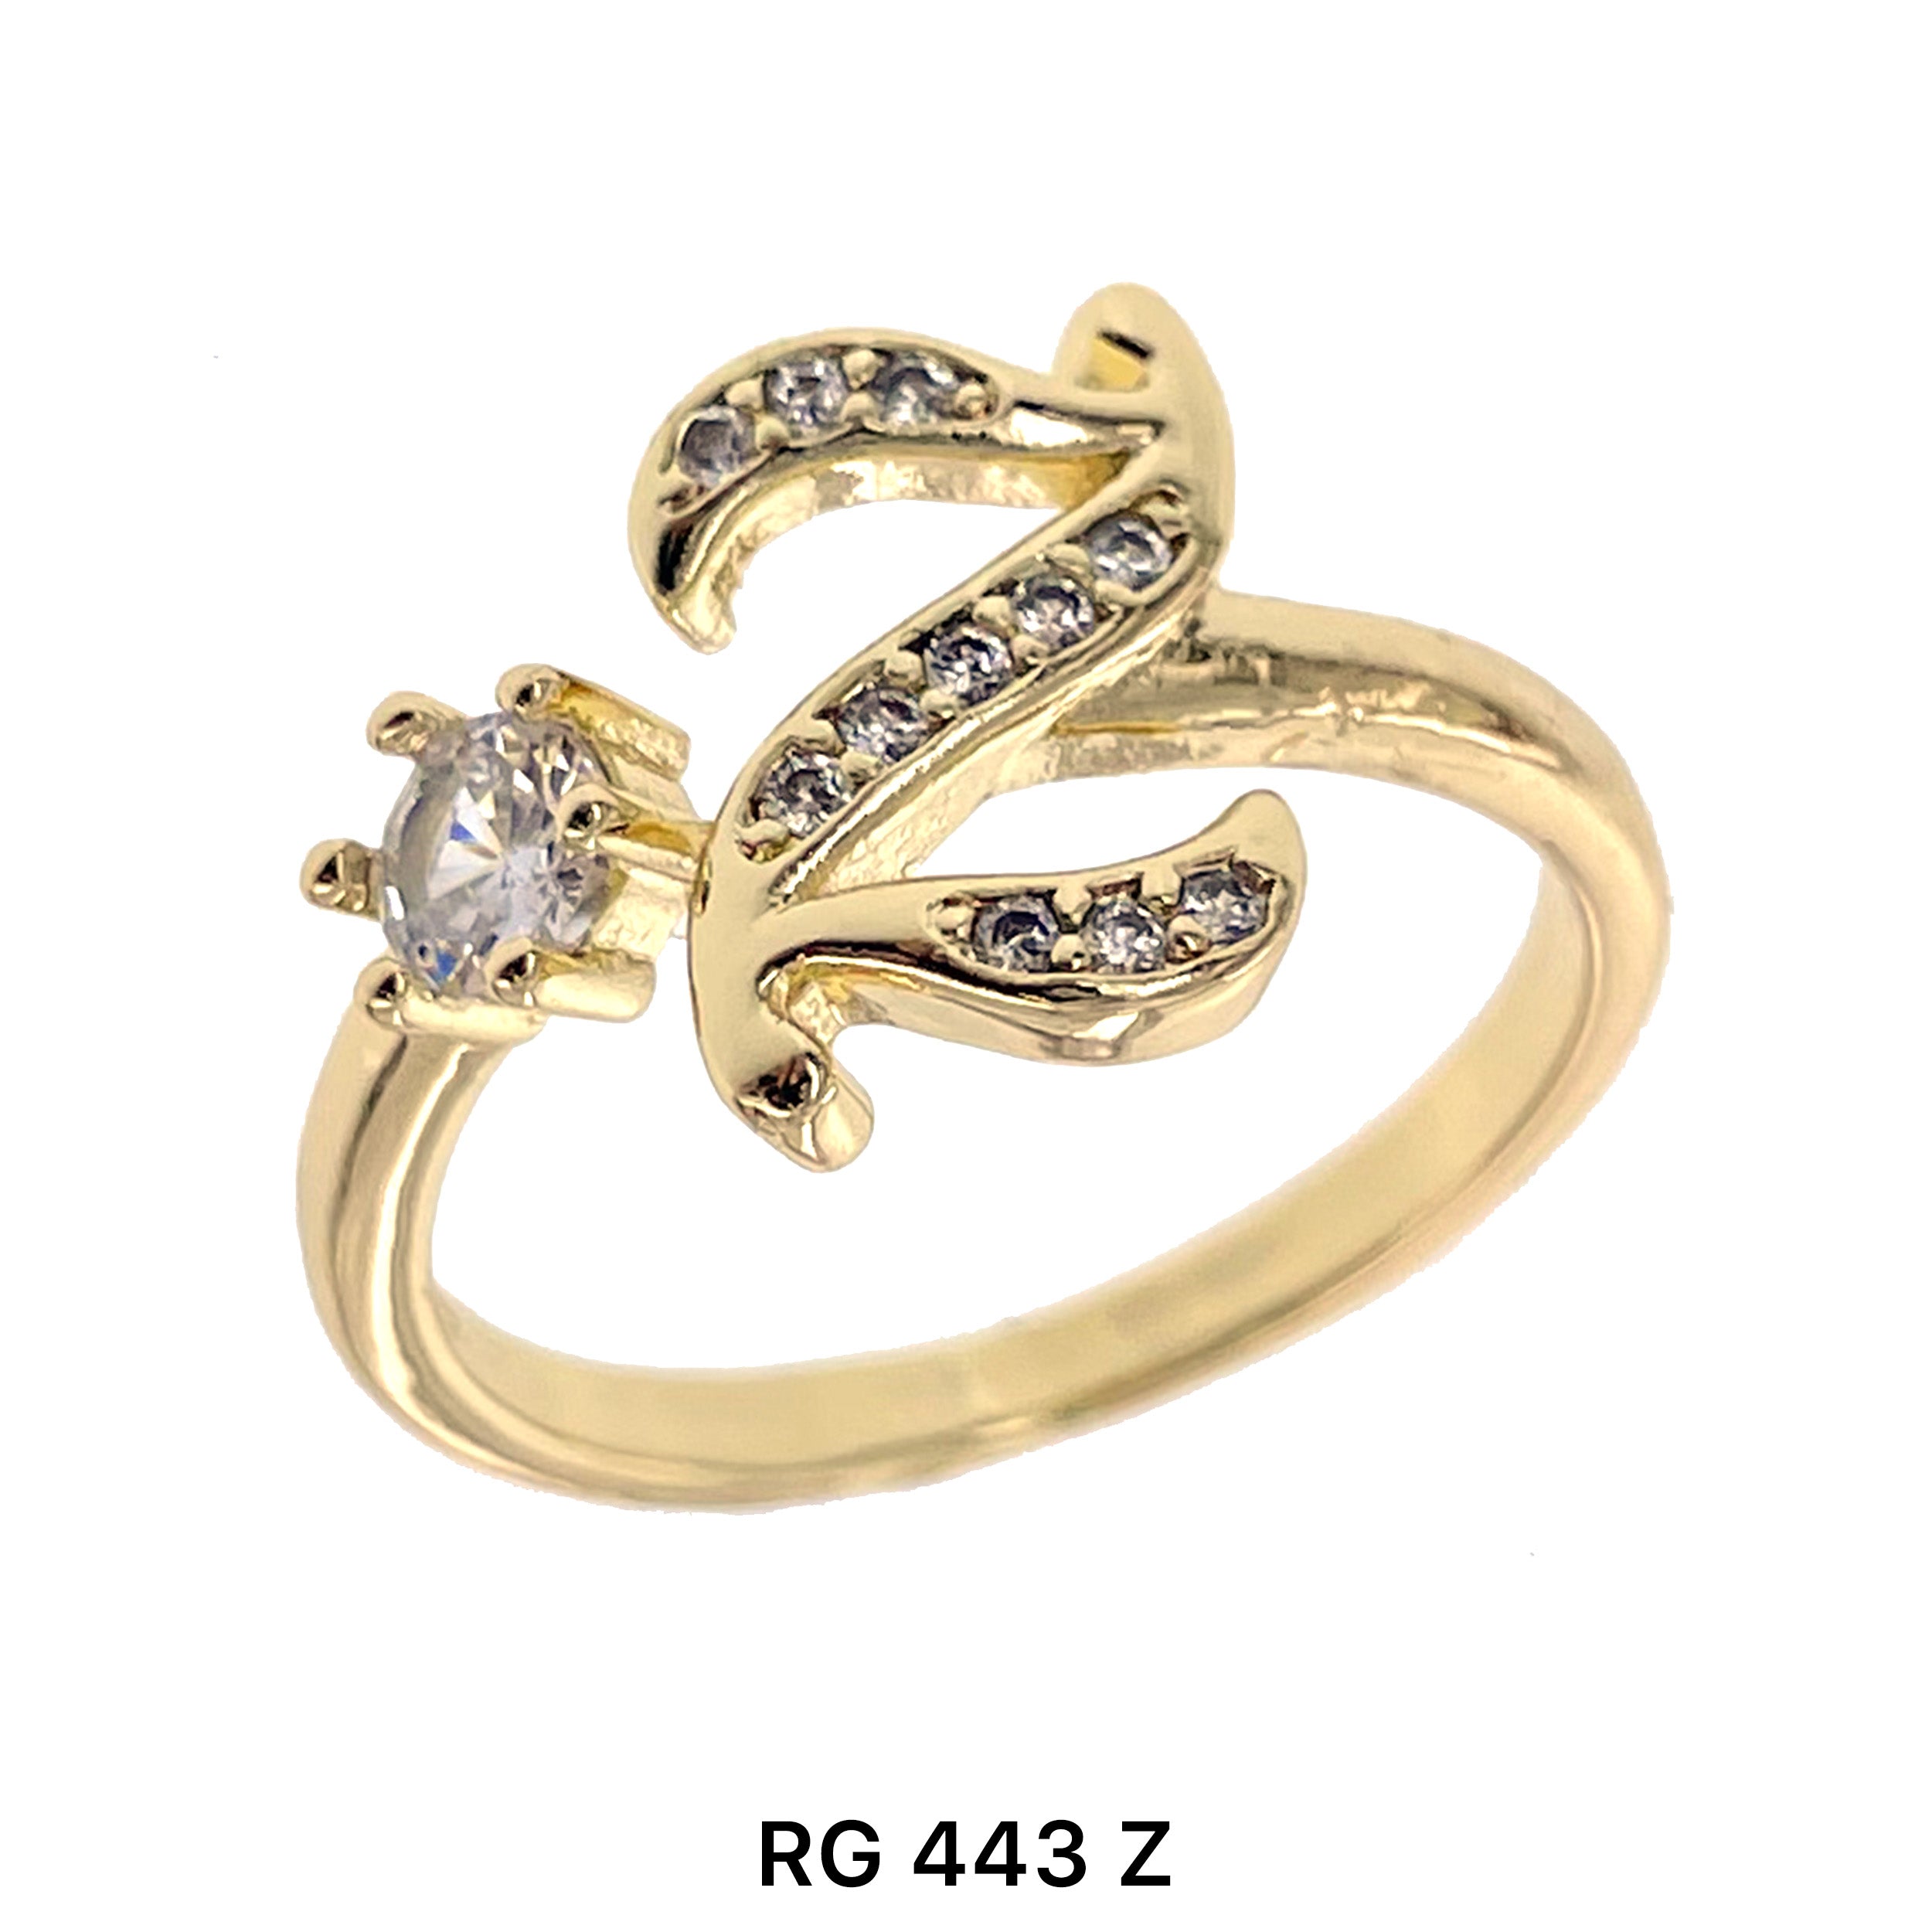 Initial Adjustable Ring RG 443 Z